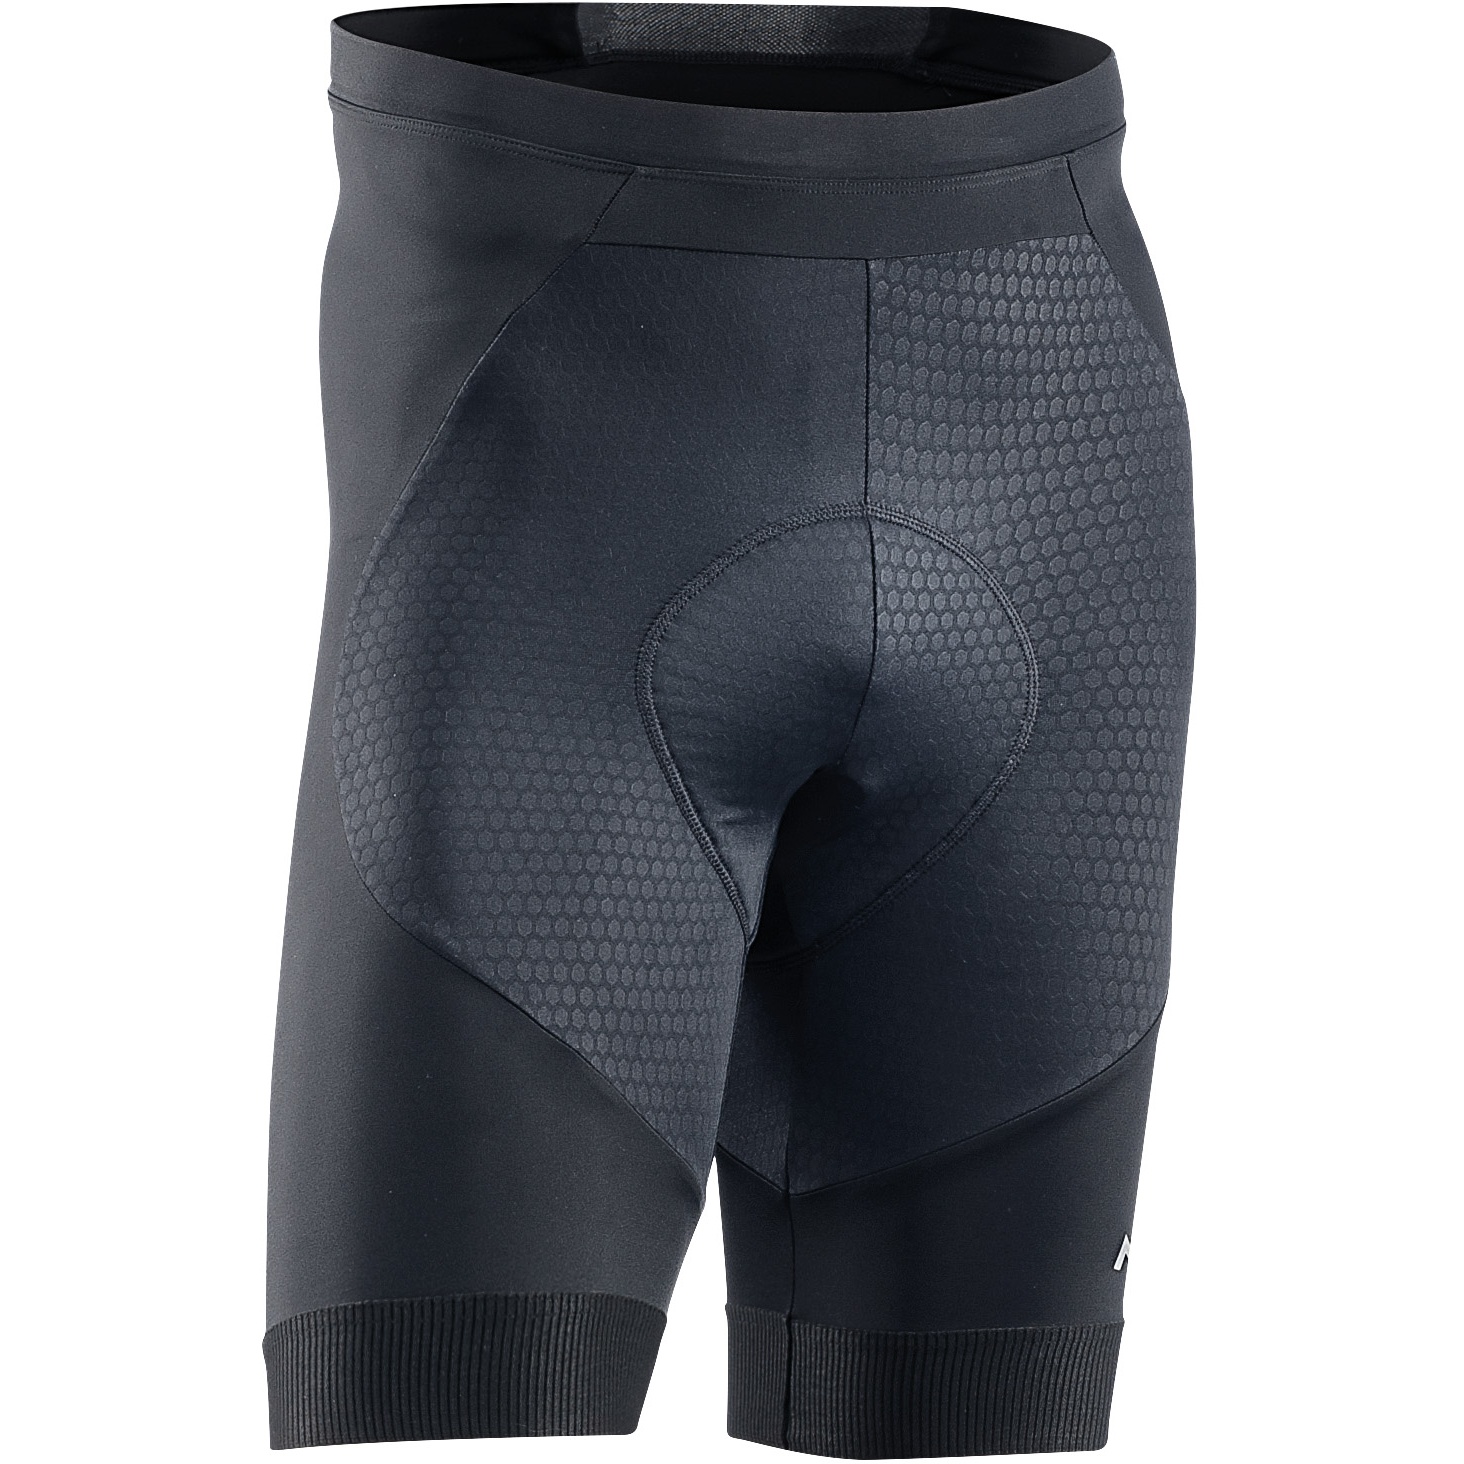 Picture of Northwave Active Shorts - black 10